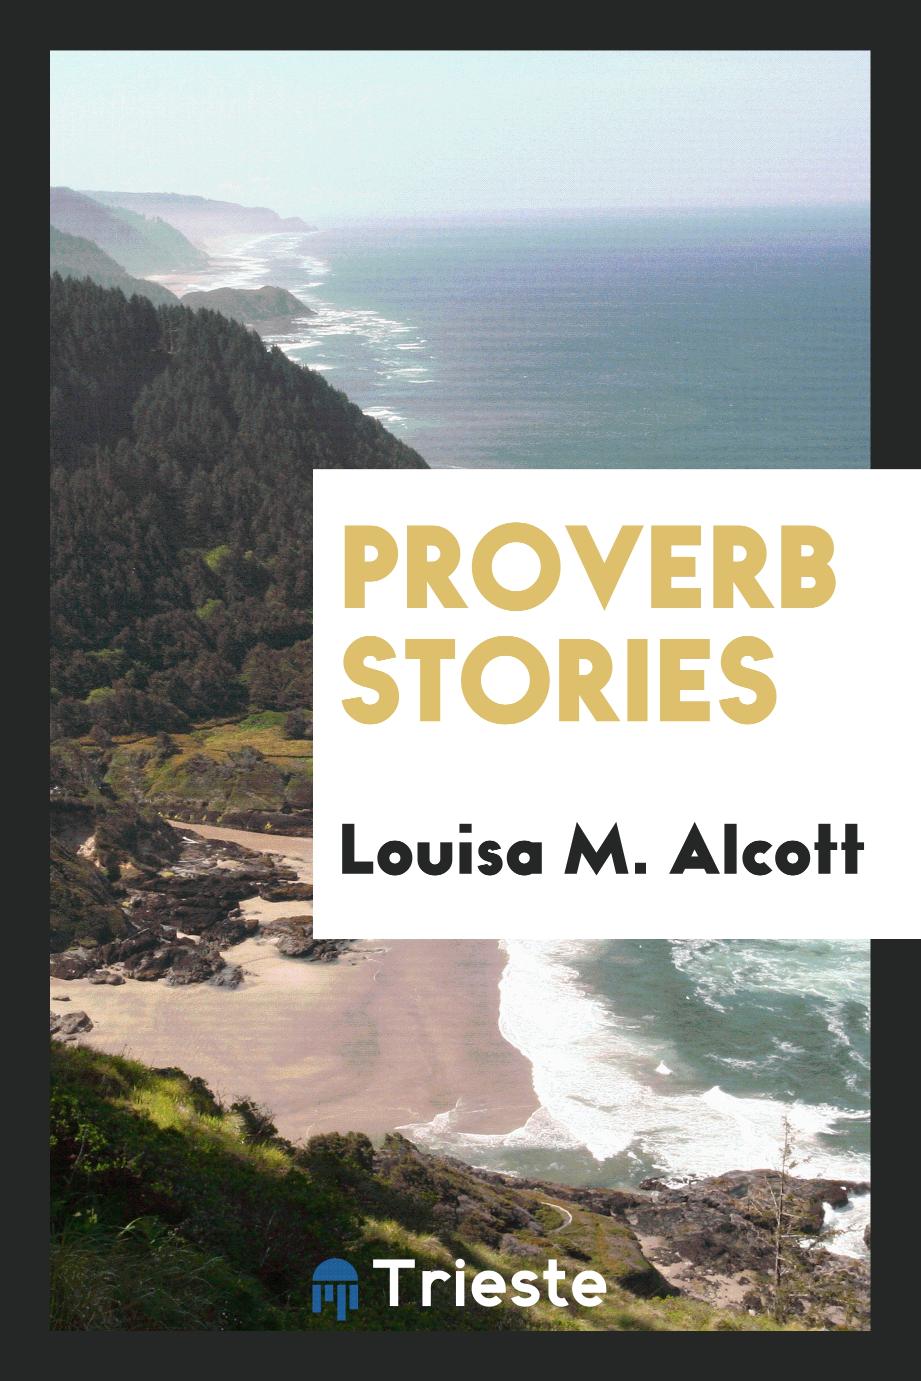 Proverb stories